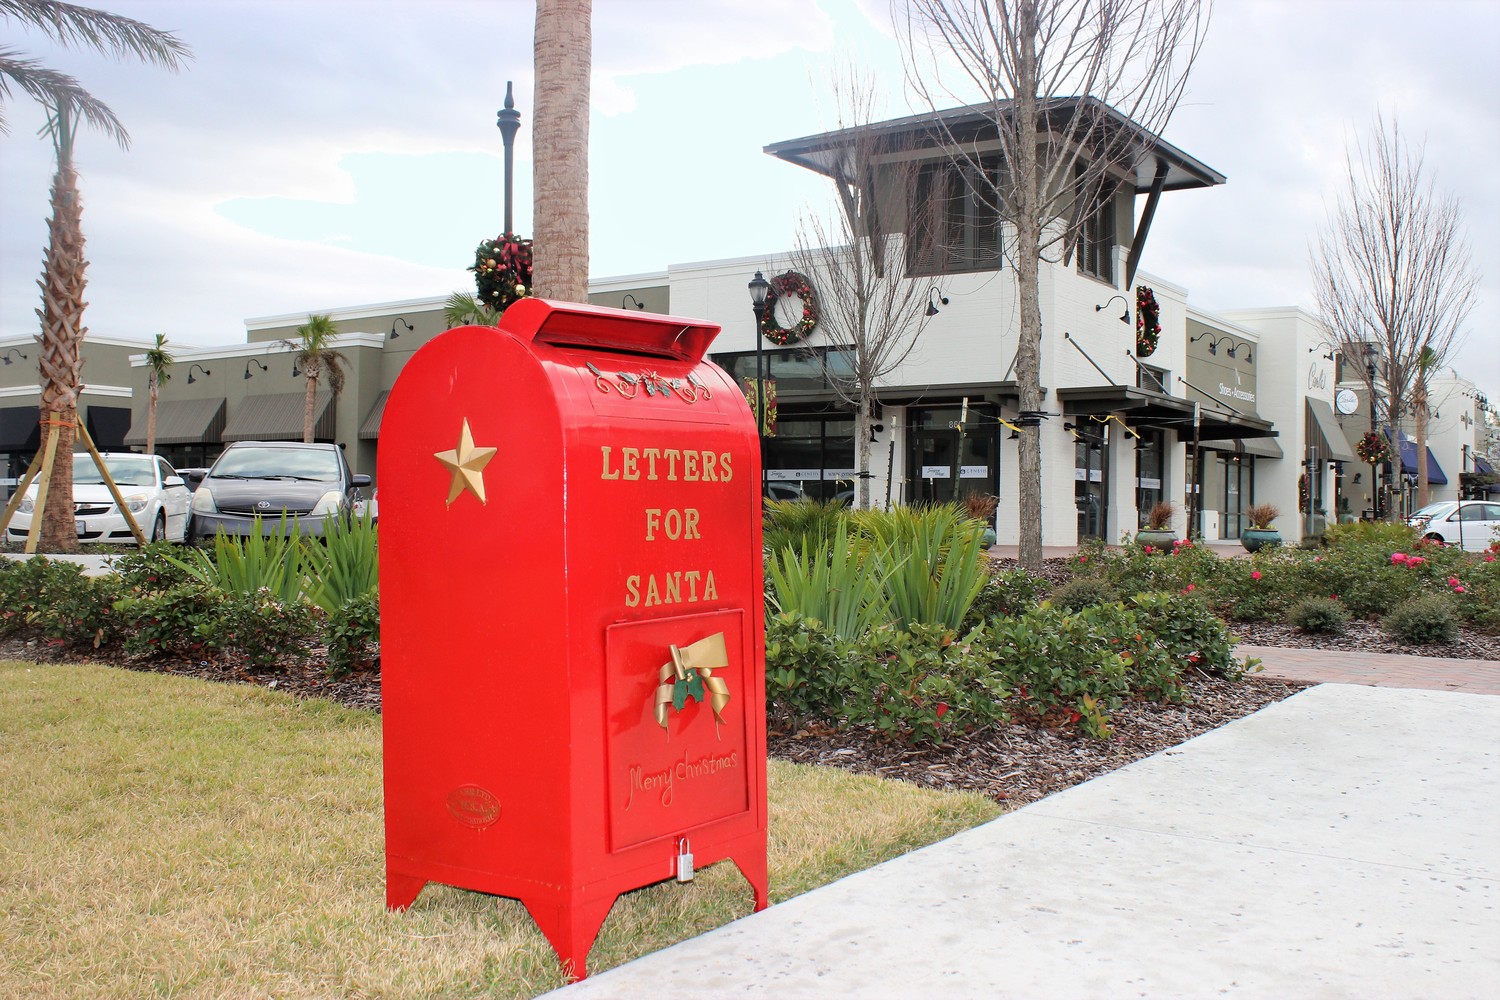 A mailbox for letters to Santa will be located near Nona Blue in Sawgrass Village. Letters mailed between Nov. 15 and Dec. 15 will receive a response from Saint Nick.